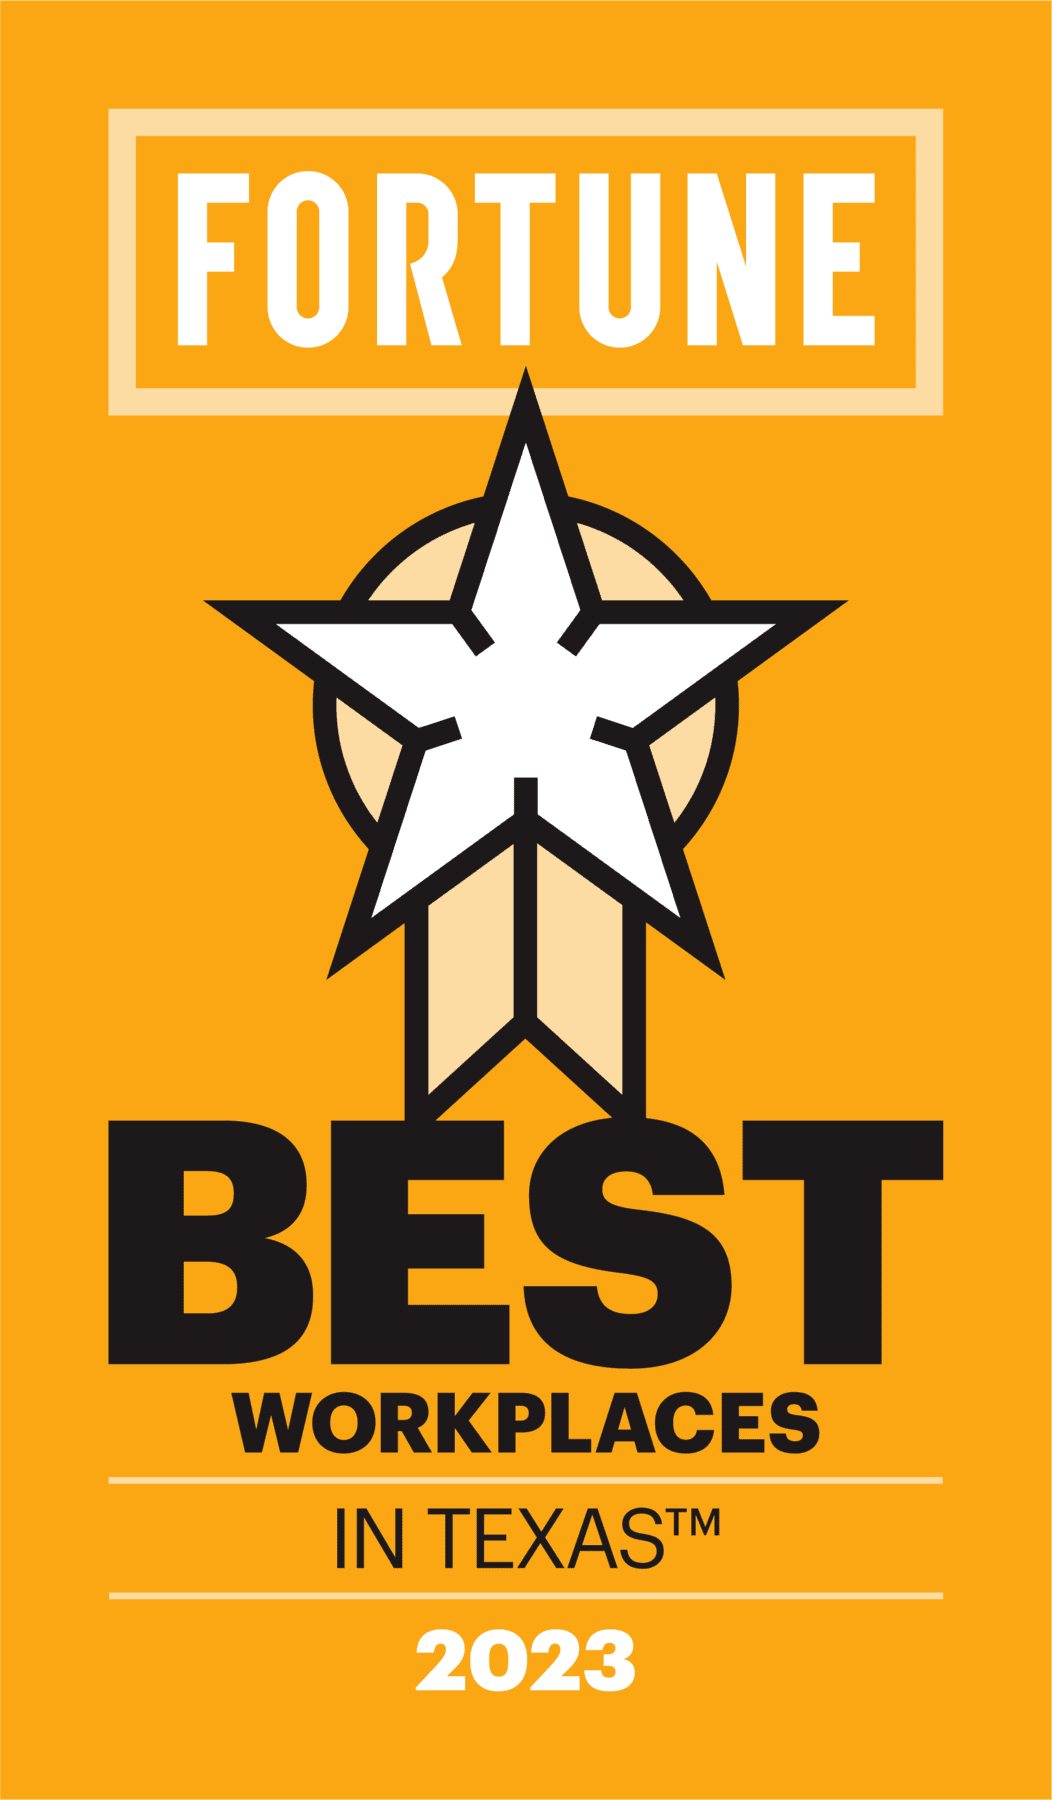 Pegasus Logistics Group awarded Fortune Best Workplaces in Texas 2023